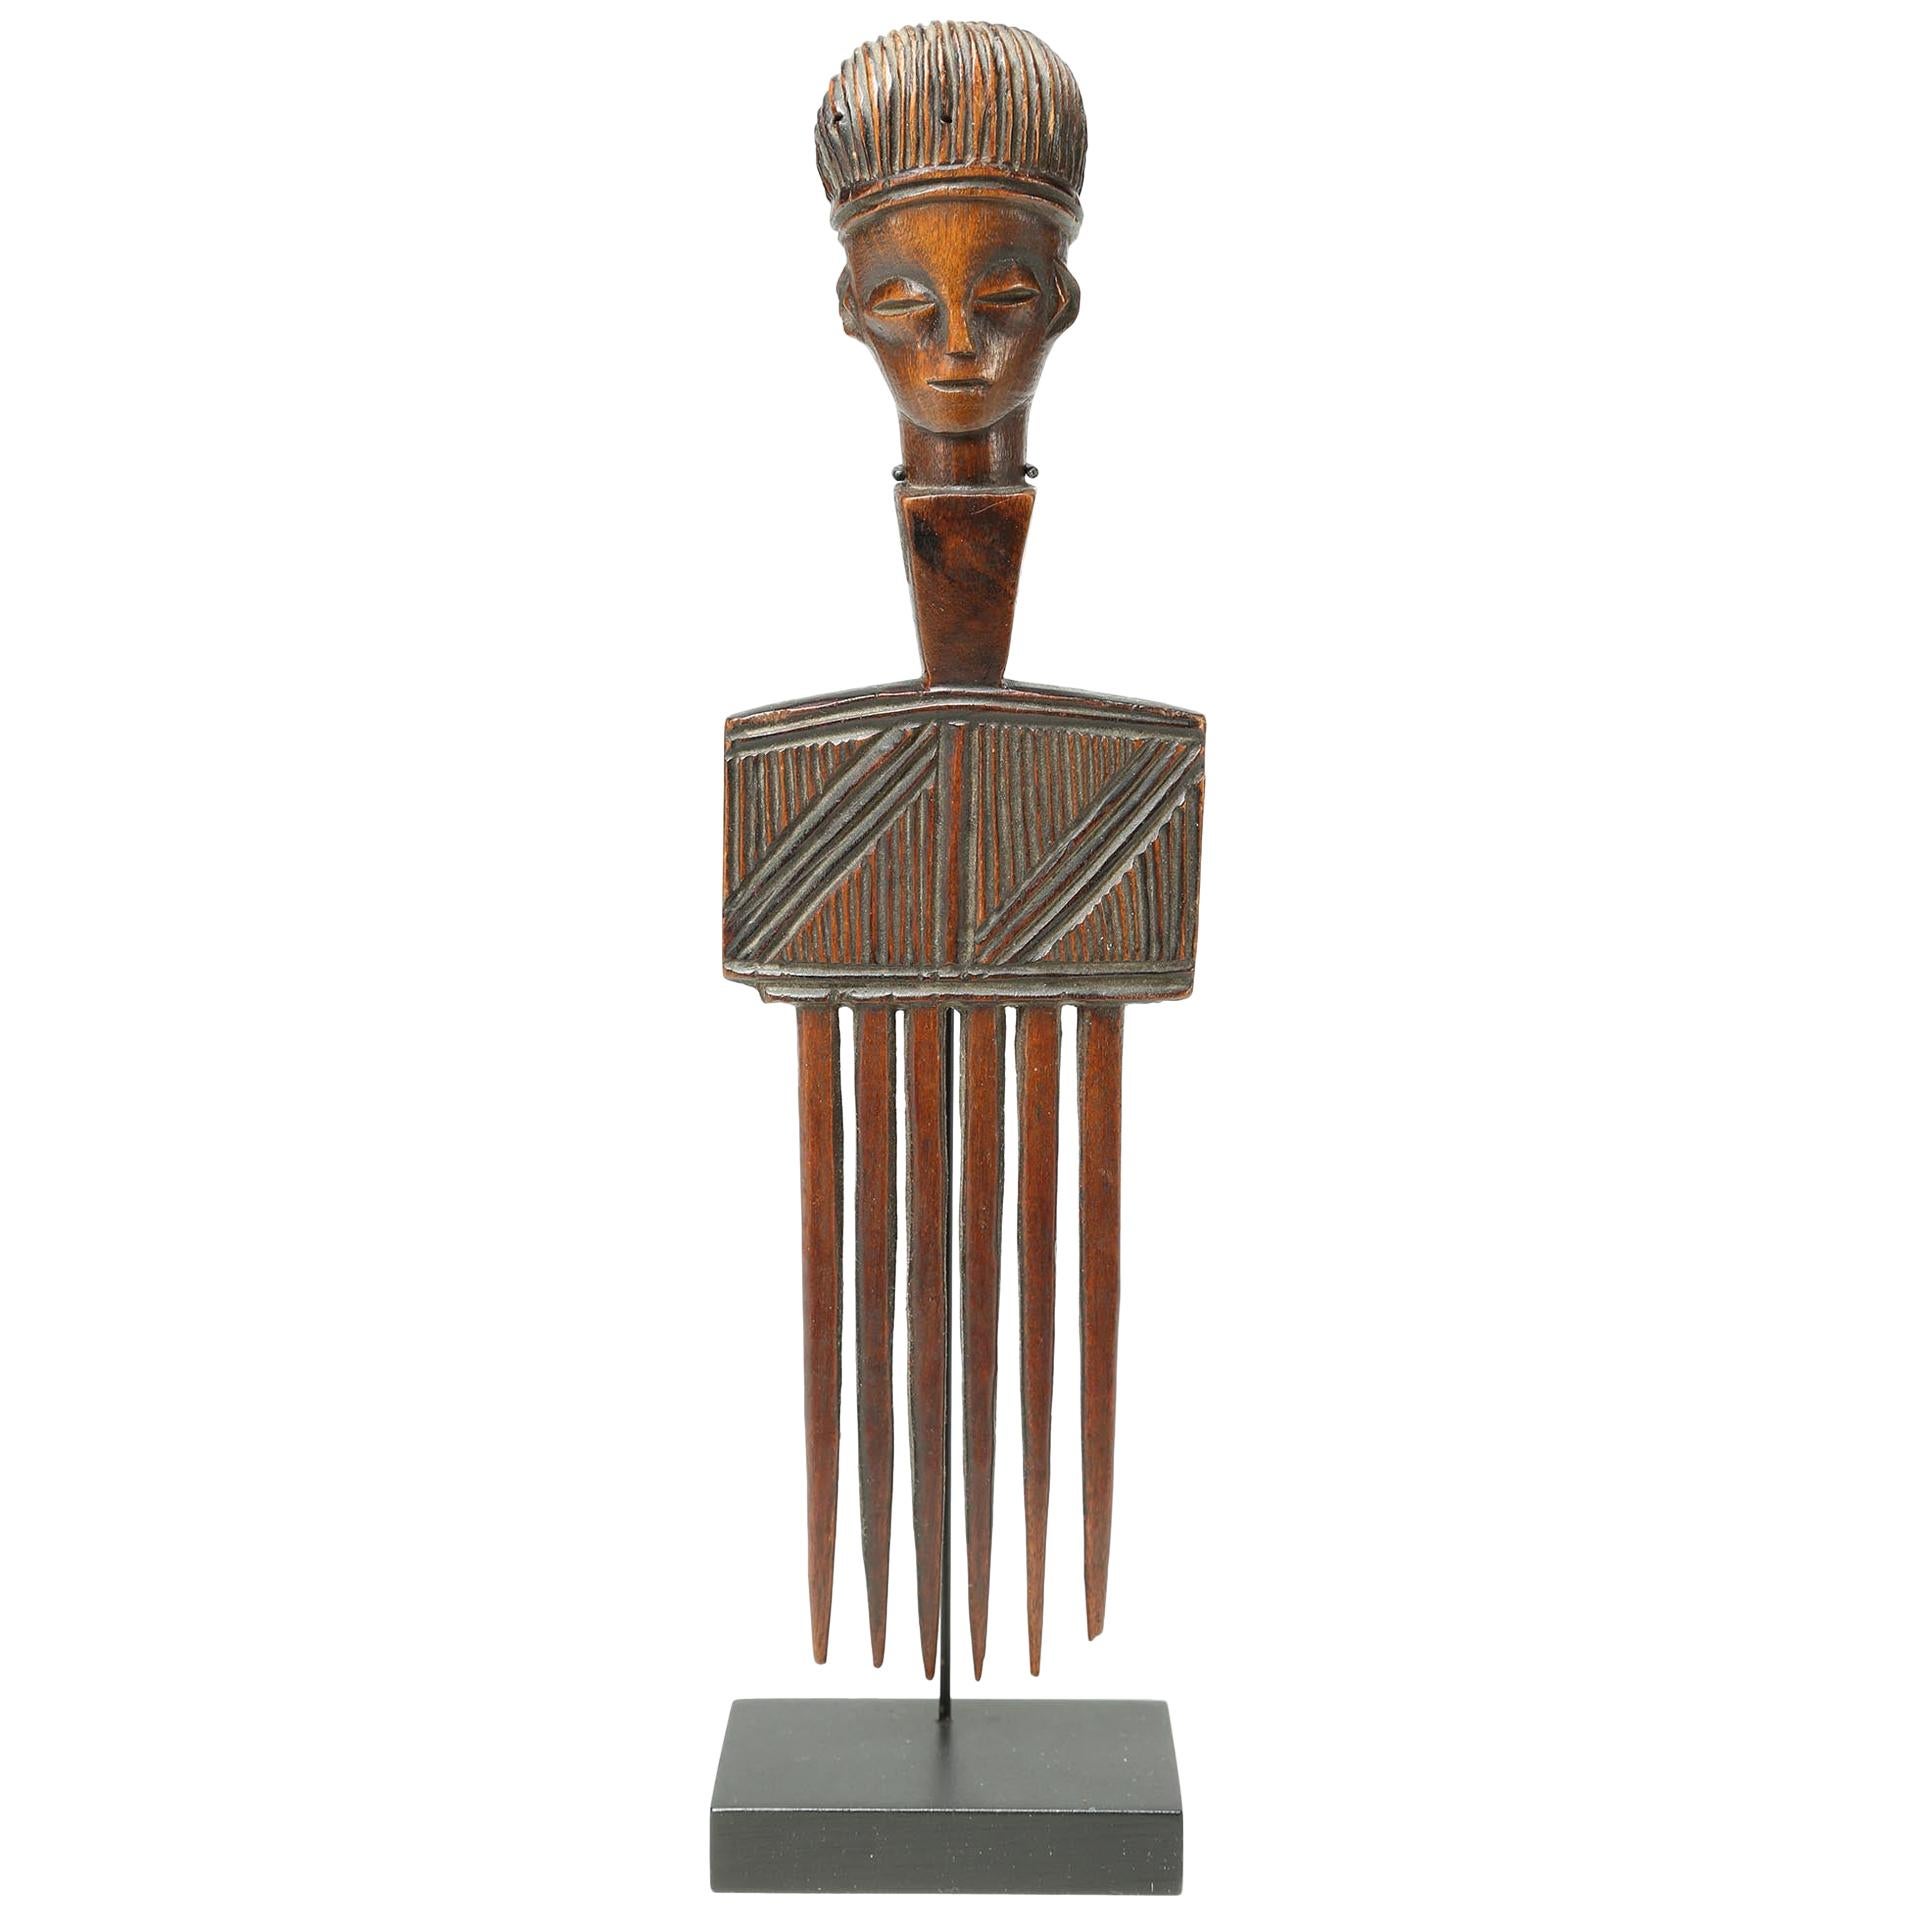 Finely Carved Wood Luena Comb, Great Hair Early 20th Century African Tribal Art For Sale